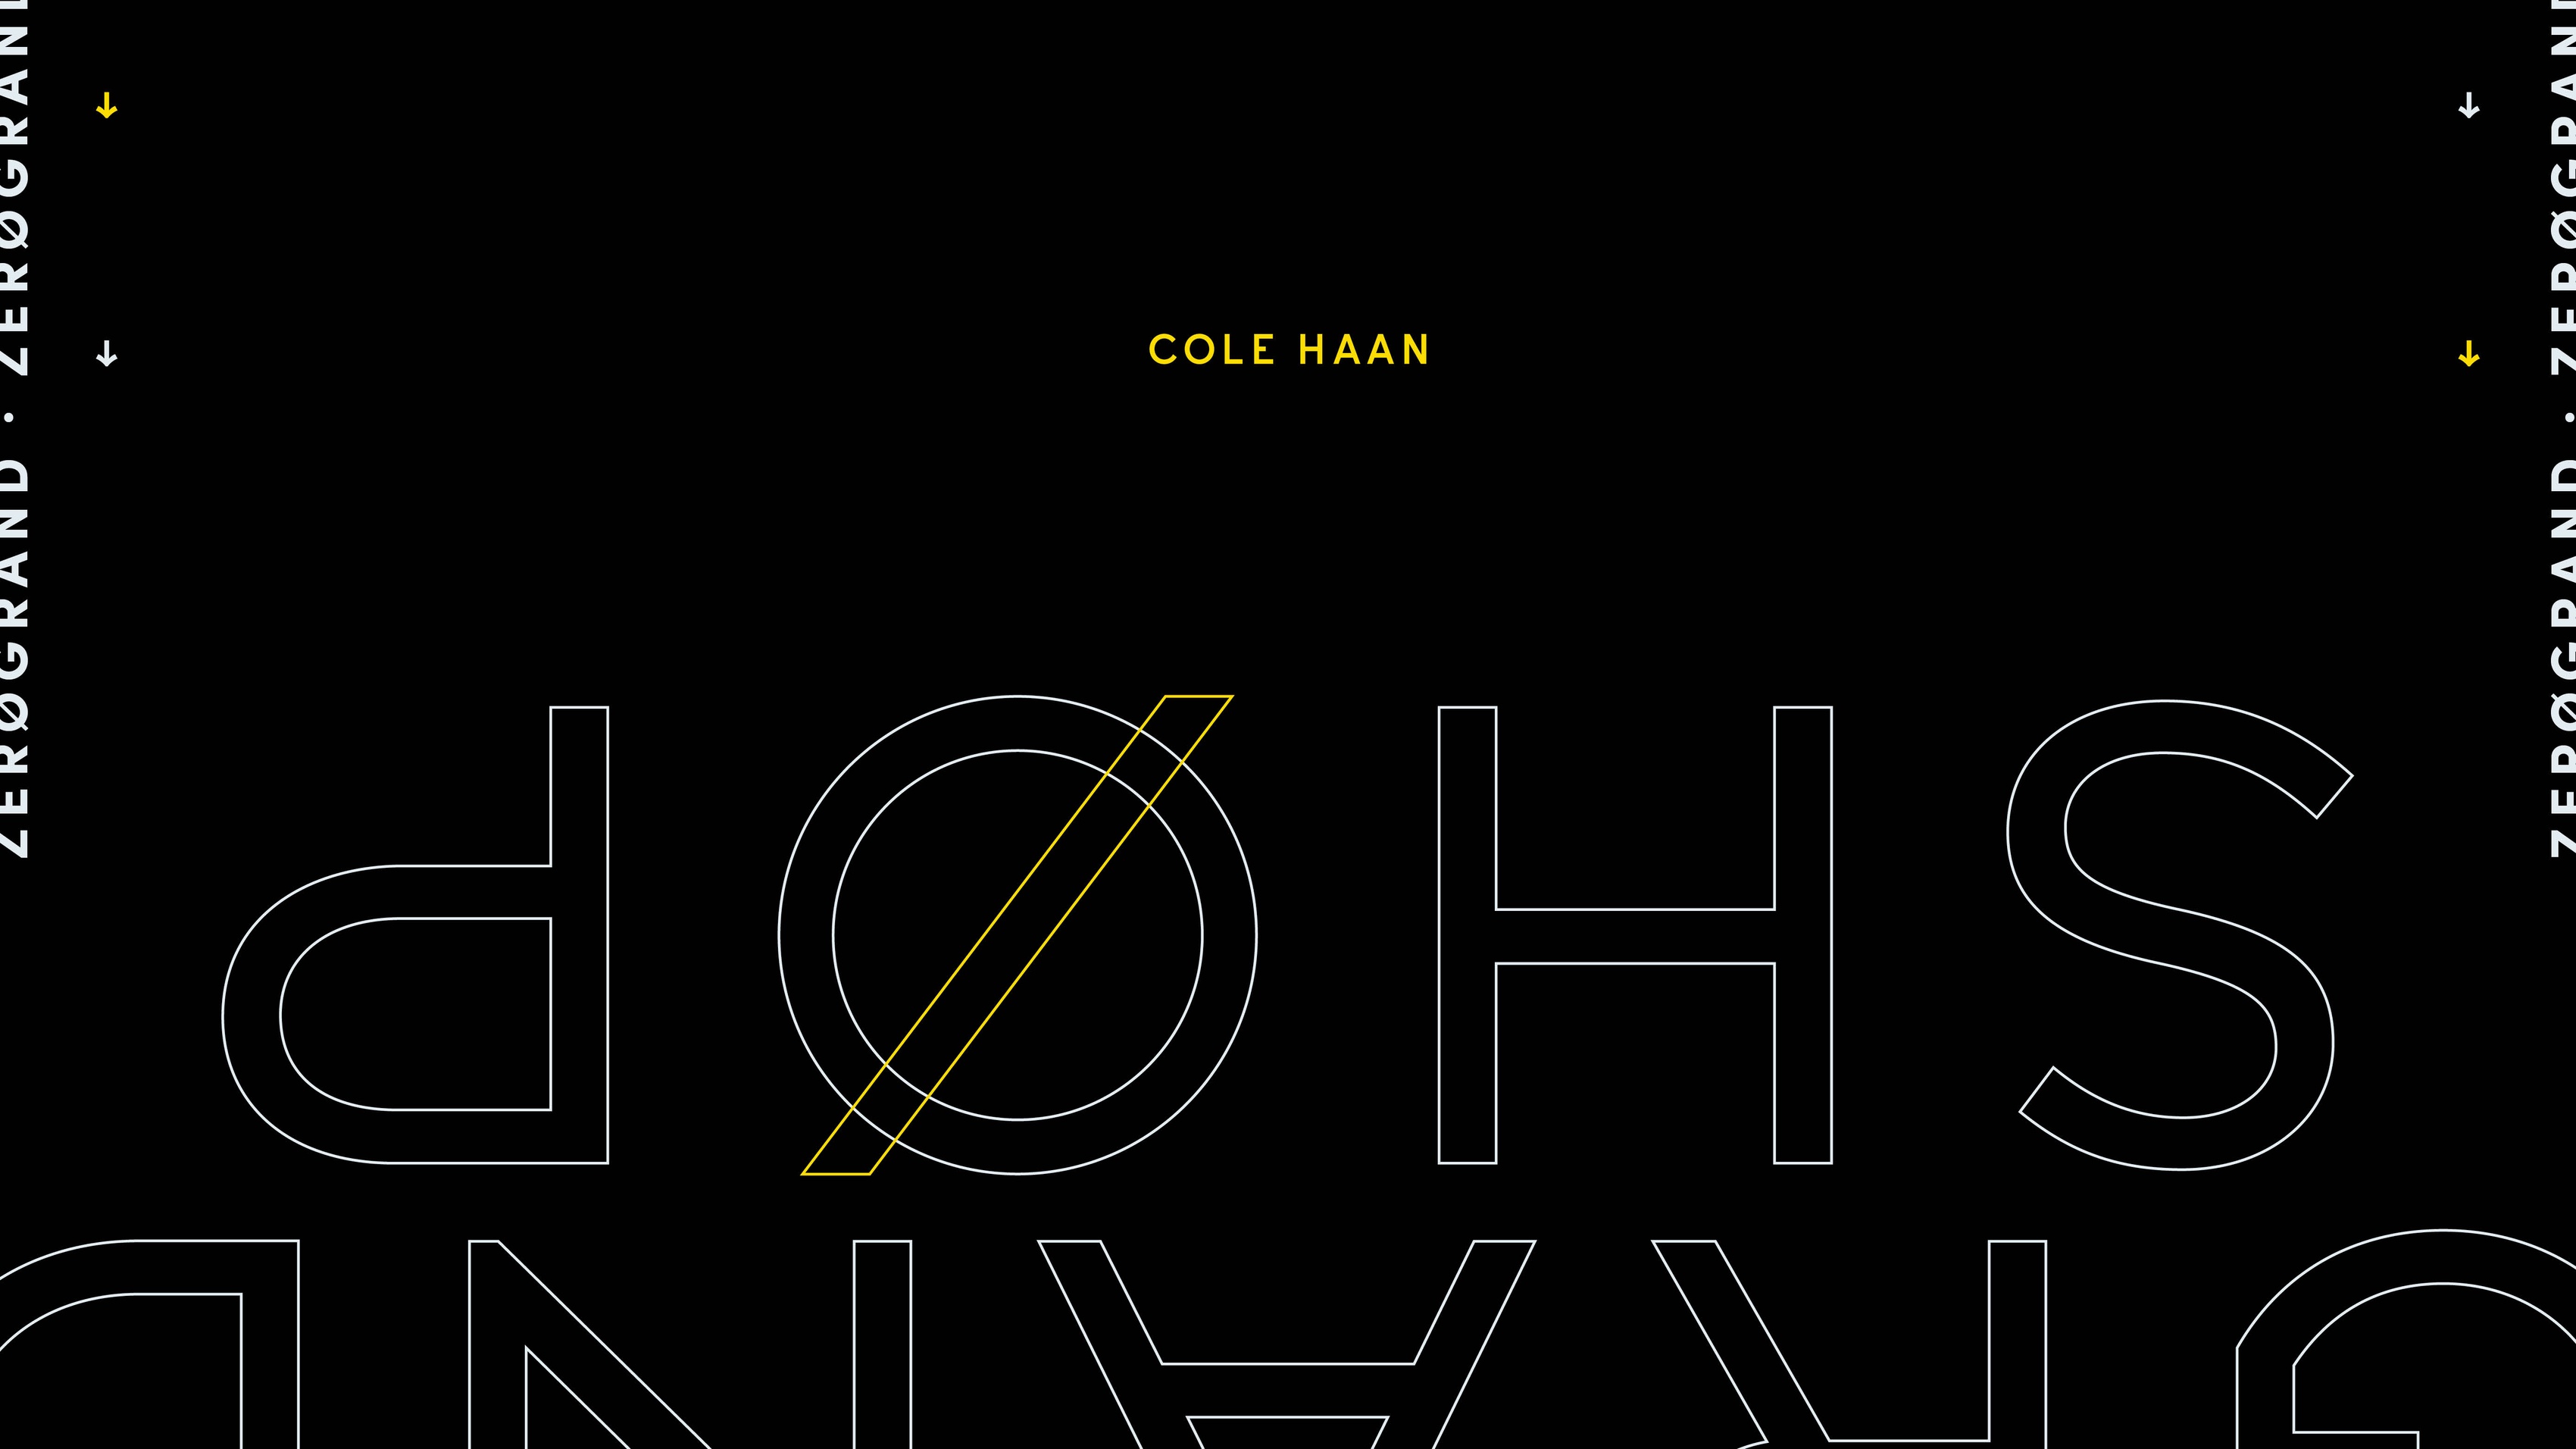 The Collected Works - Cole Haan - 01